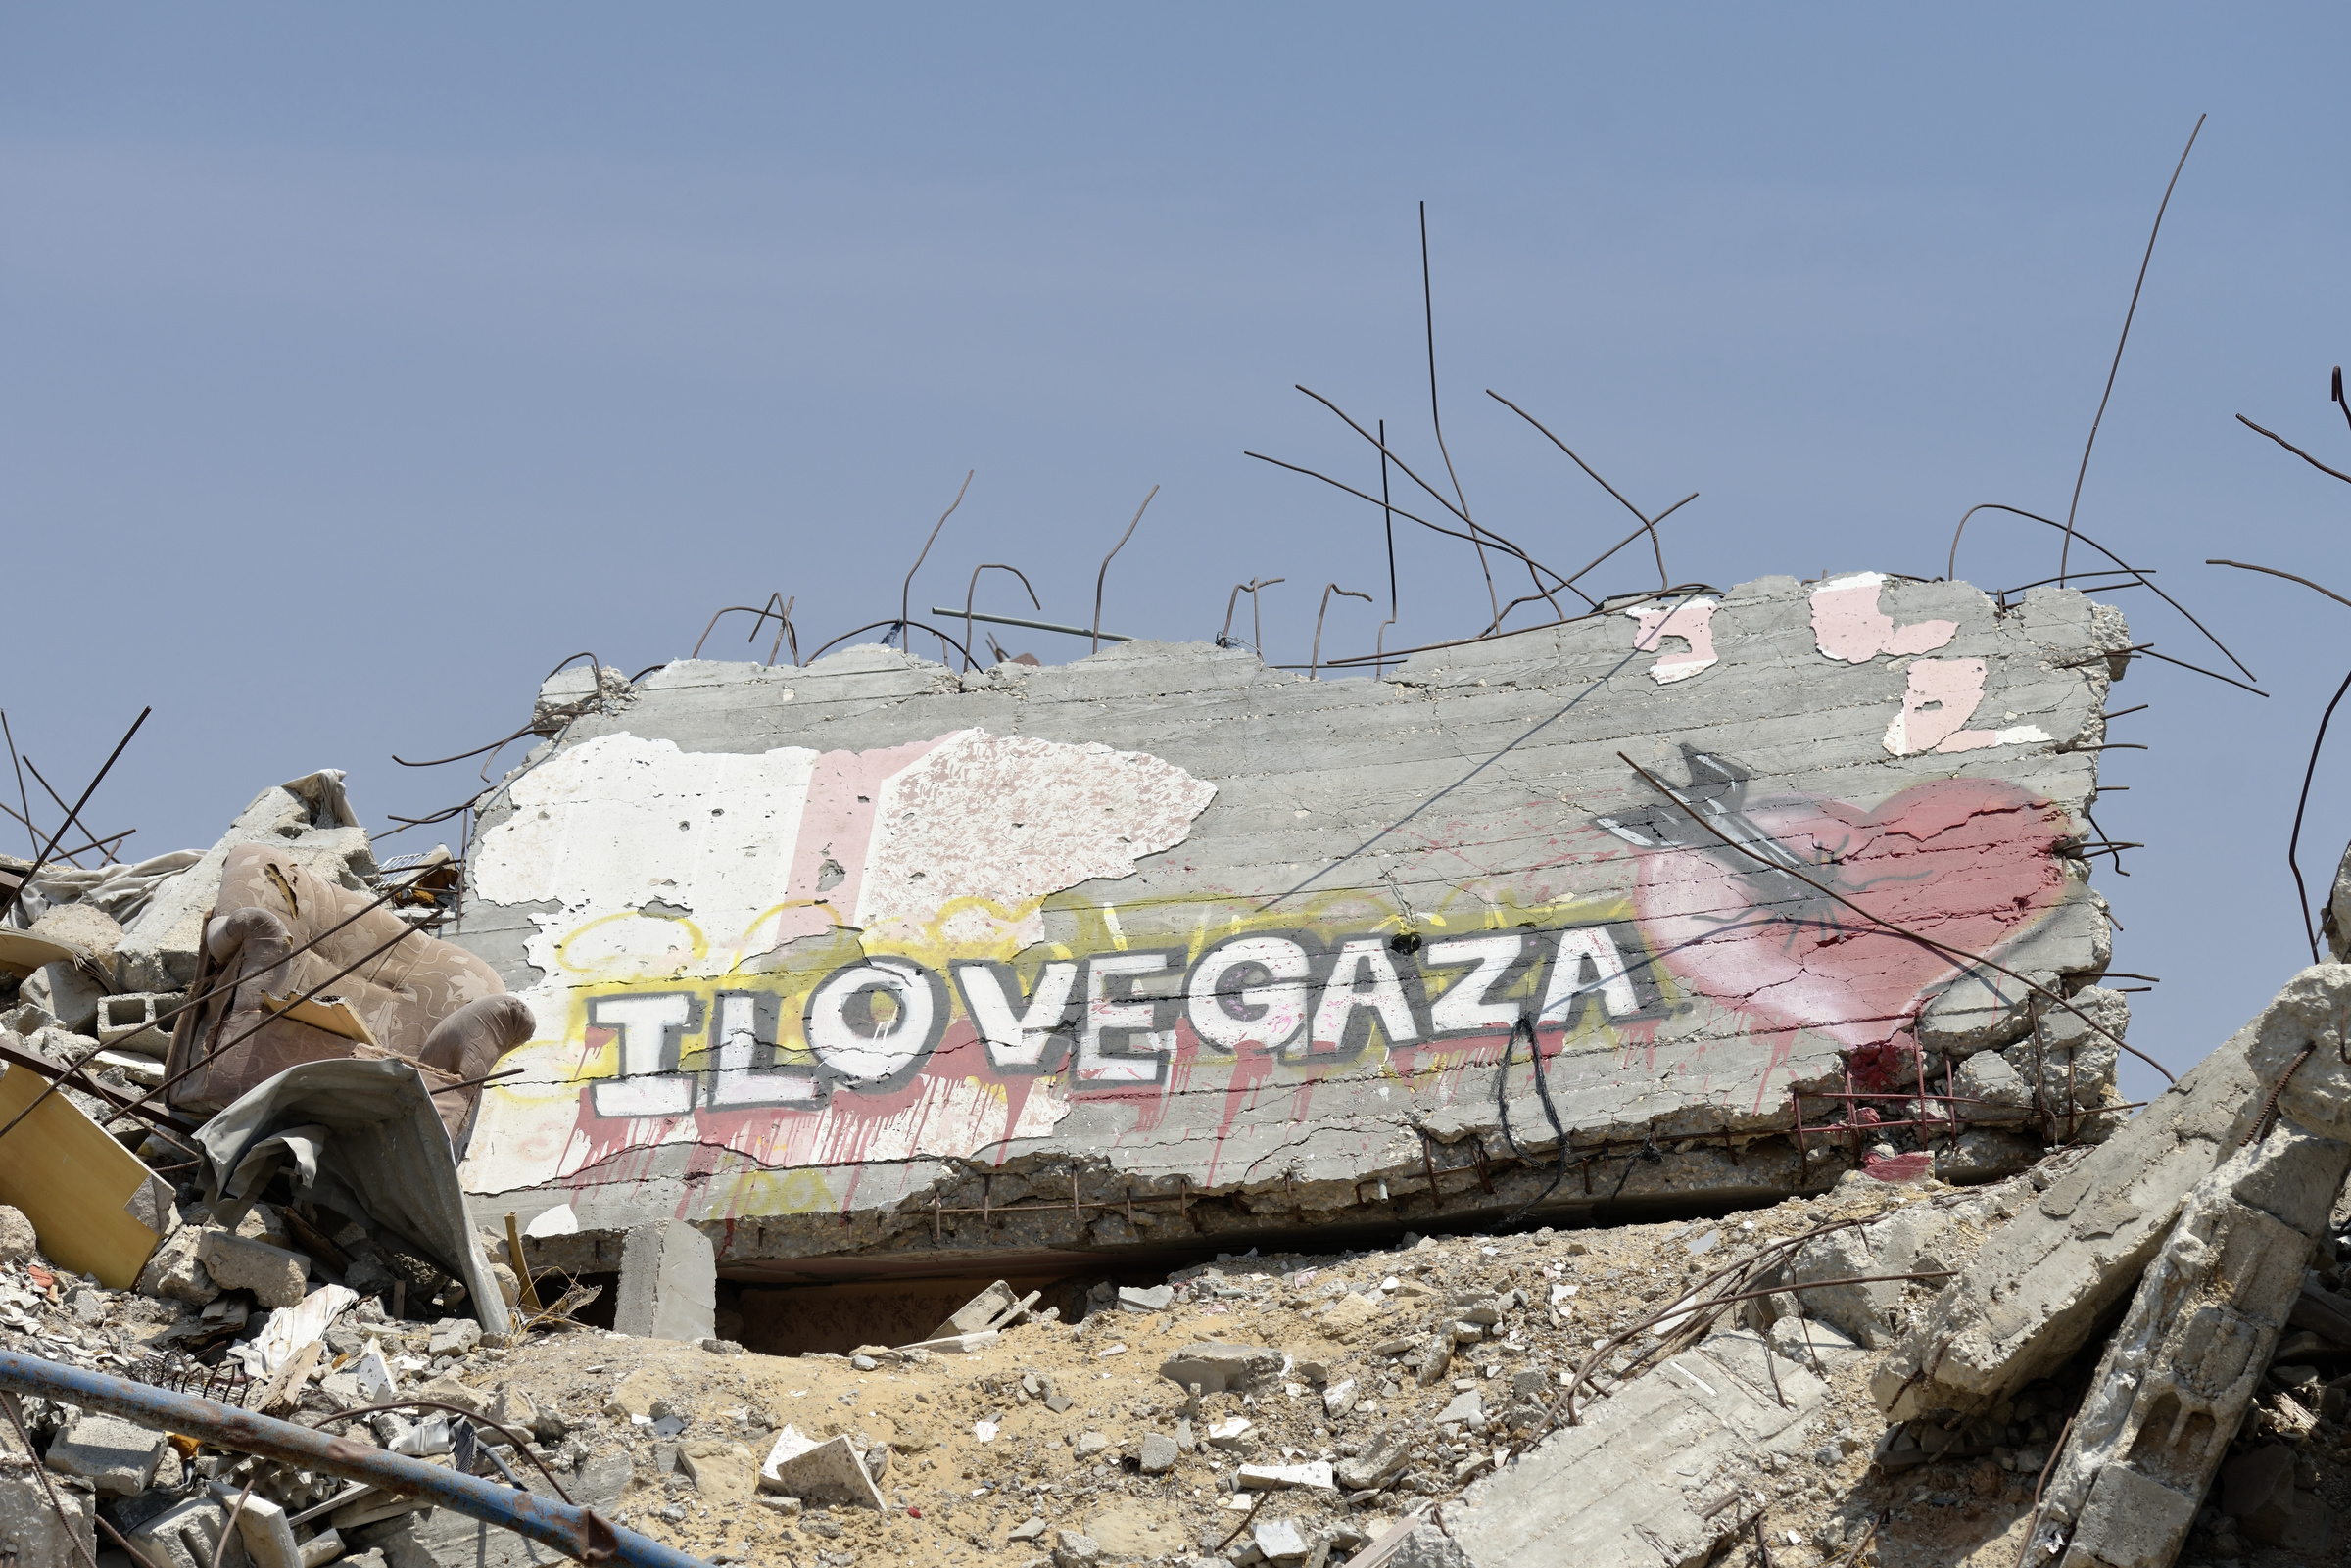 Neighborhood rubble with a message painted on a wall is  seen in Gaza City June 6.  Houses in the area were destroyed during the 2014 war between Israel and the Hamas government of Gaza. (CNS photo/Paul Jeffrey) See GAZA-HOUSING July 17, 2015.